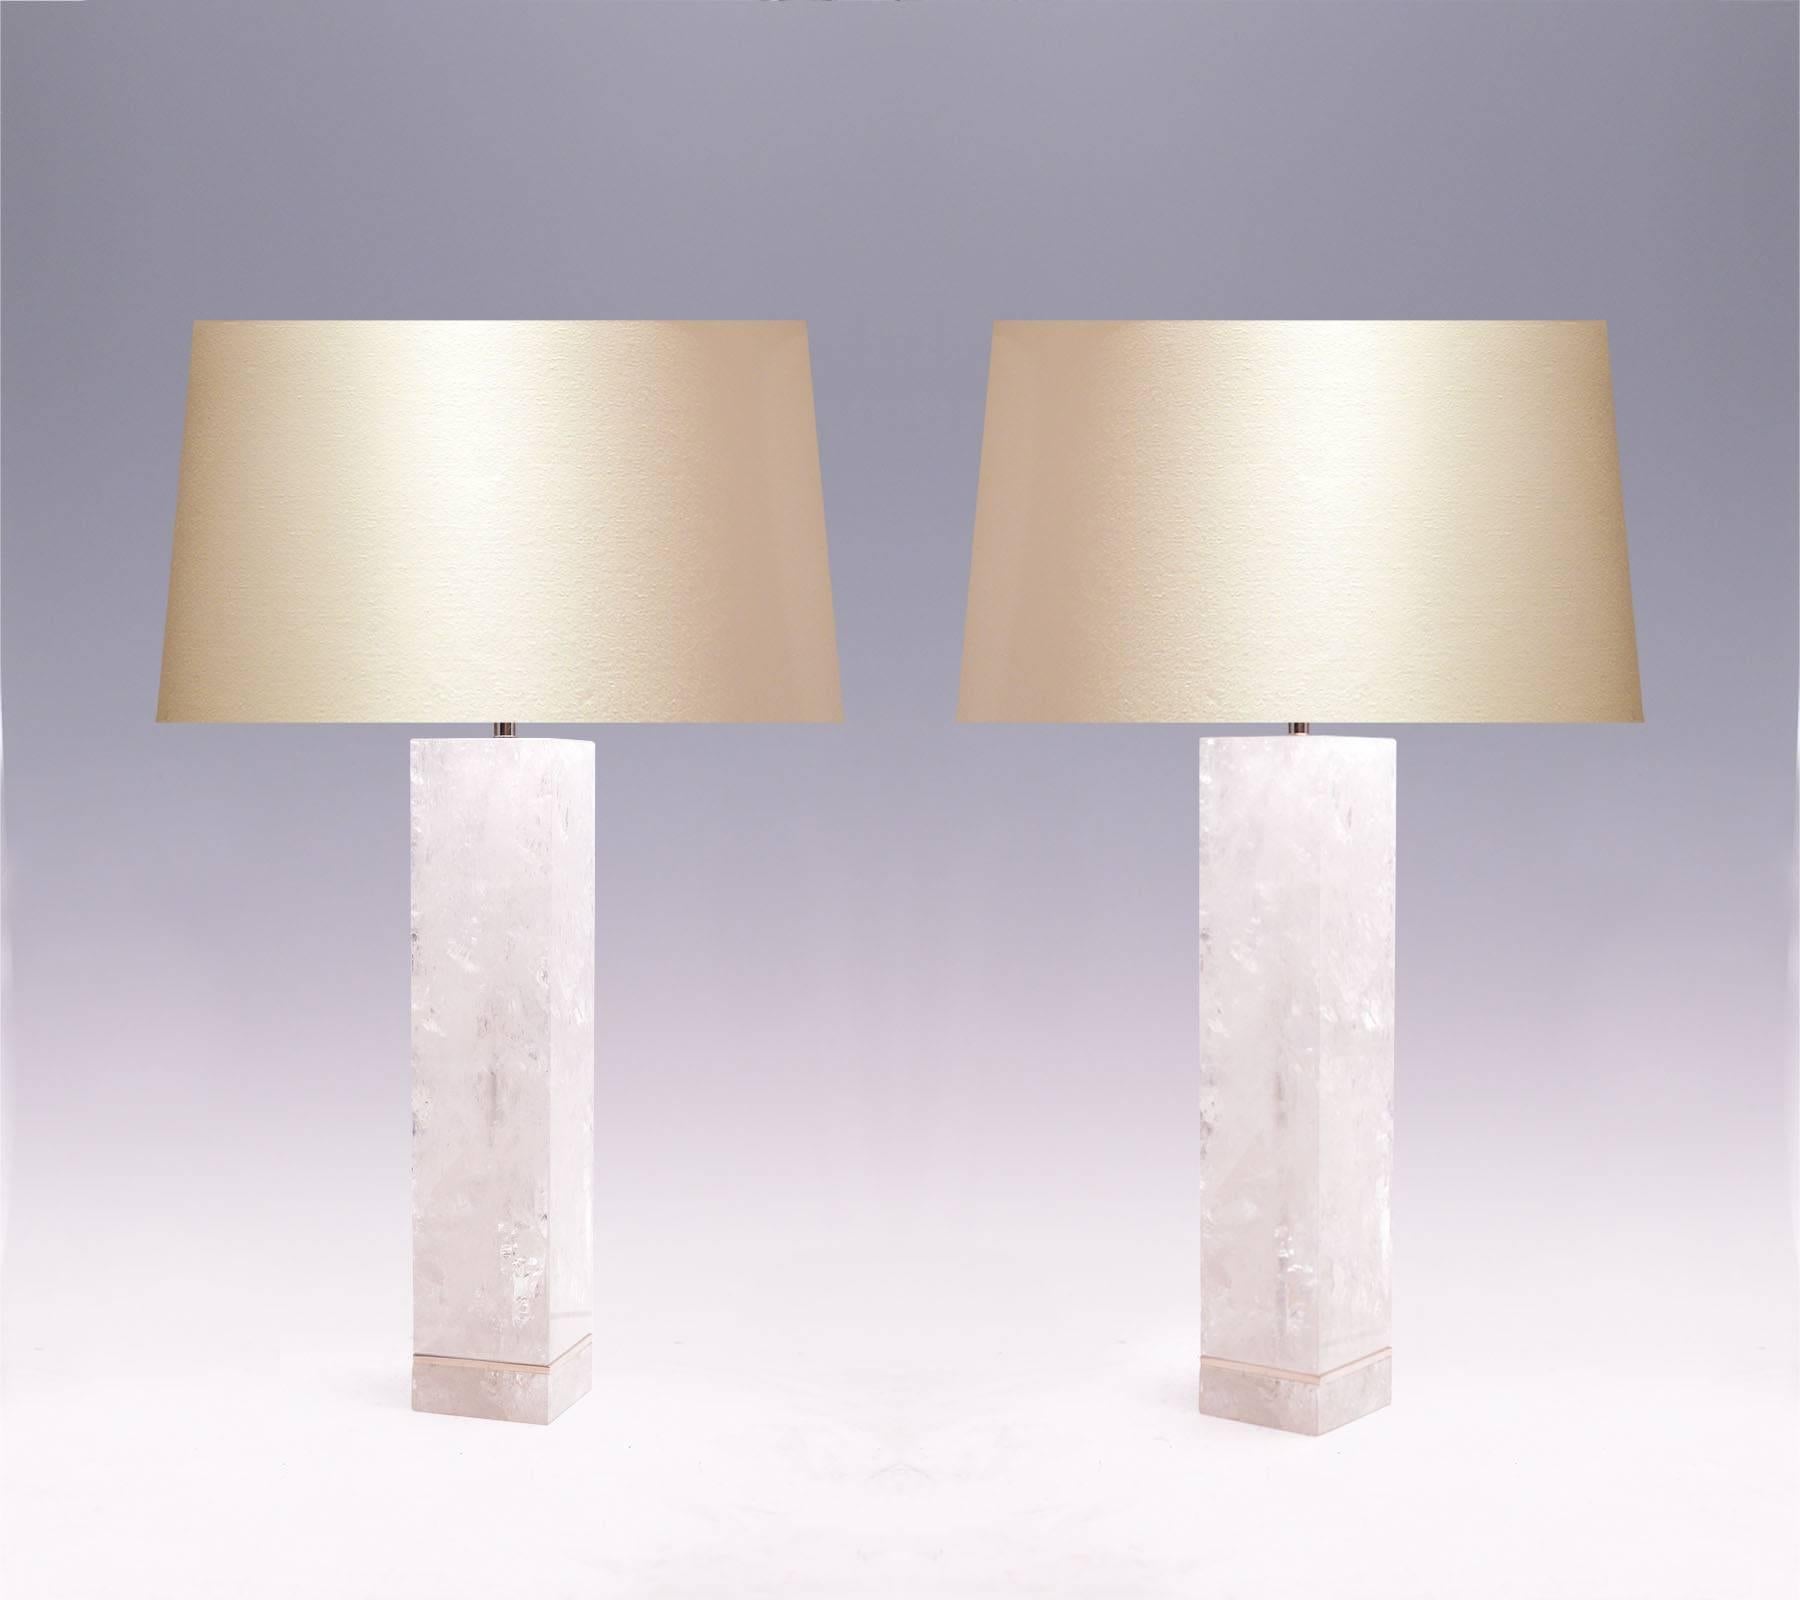 A pair of large square column-form rock crystal quartz lamps with polished brass insert in the lower part, created by Phoenix Gallery, NYC.
Measures to the rock crystal: 18.25